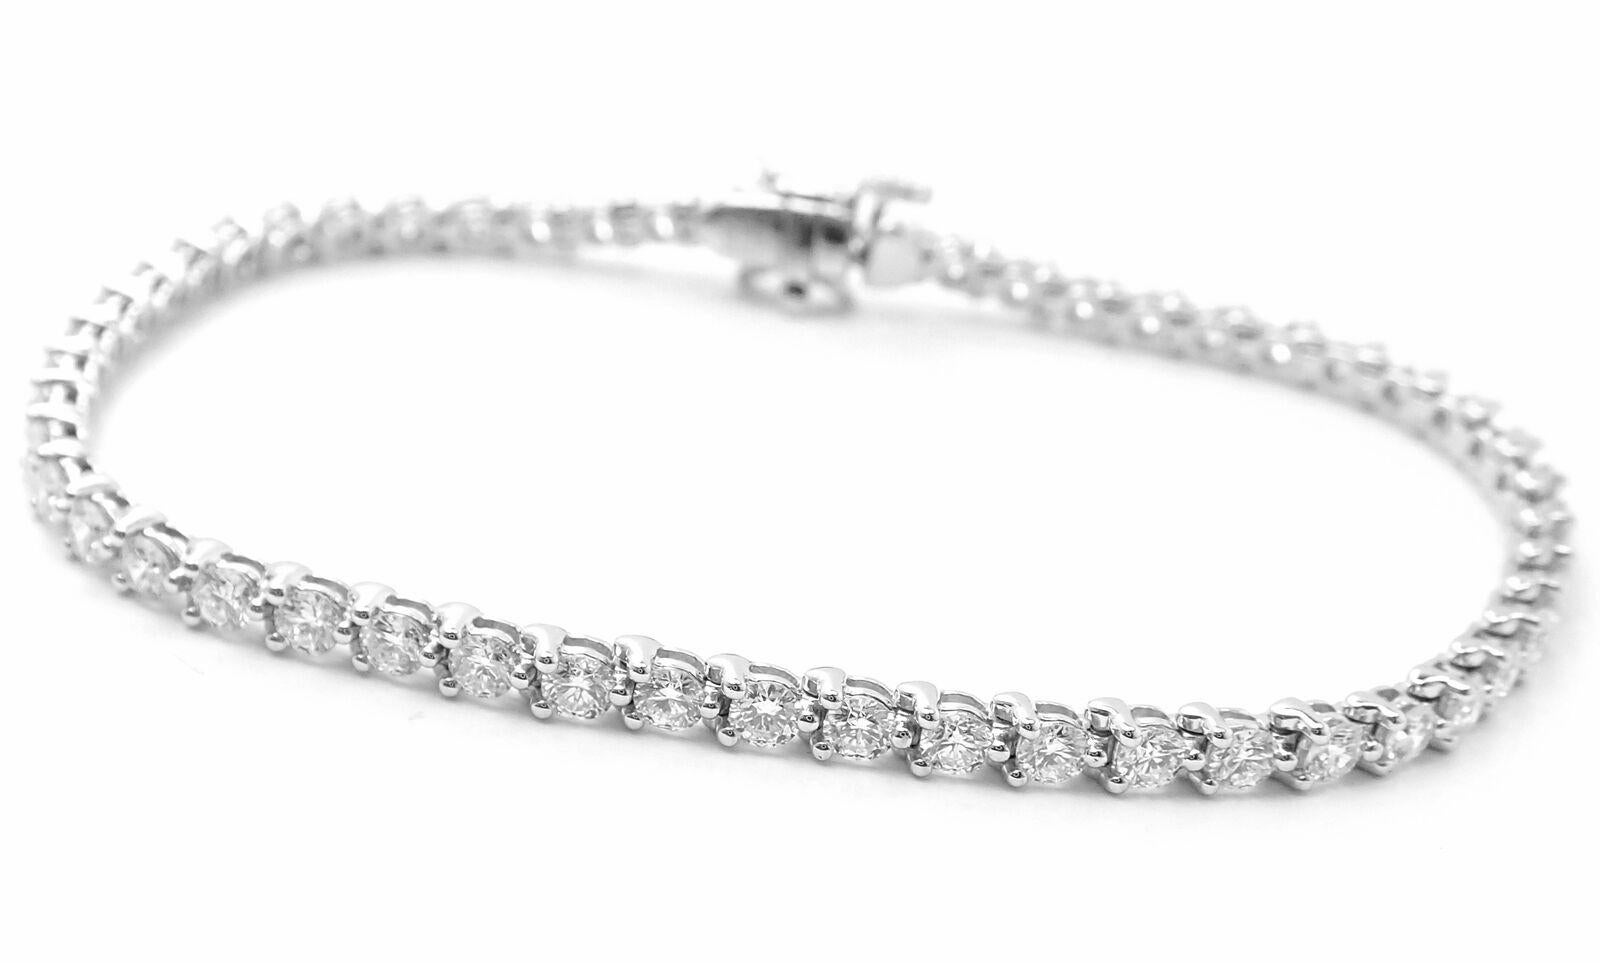 Platinum Diamond Line Tennis Bracelet by Tiffany & Co from Victoria collection.
With 51 round brilliant cut diamonds VS1 clarity, E color total weight approx. 3.08ct
4 marque cut diamonds.
Details:
Weight: 11.7 grams
Length: 7